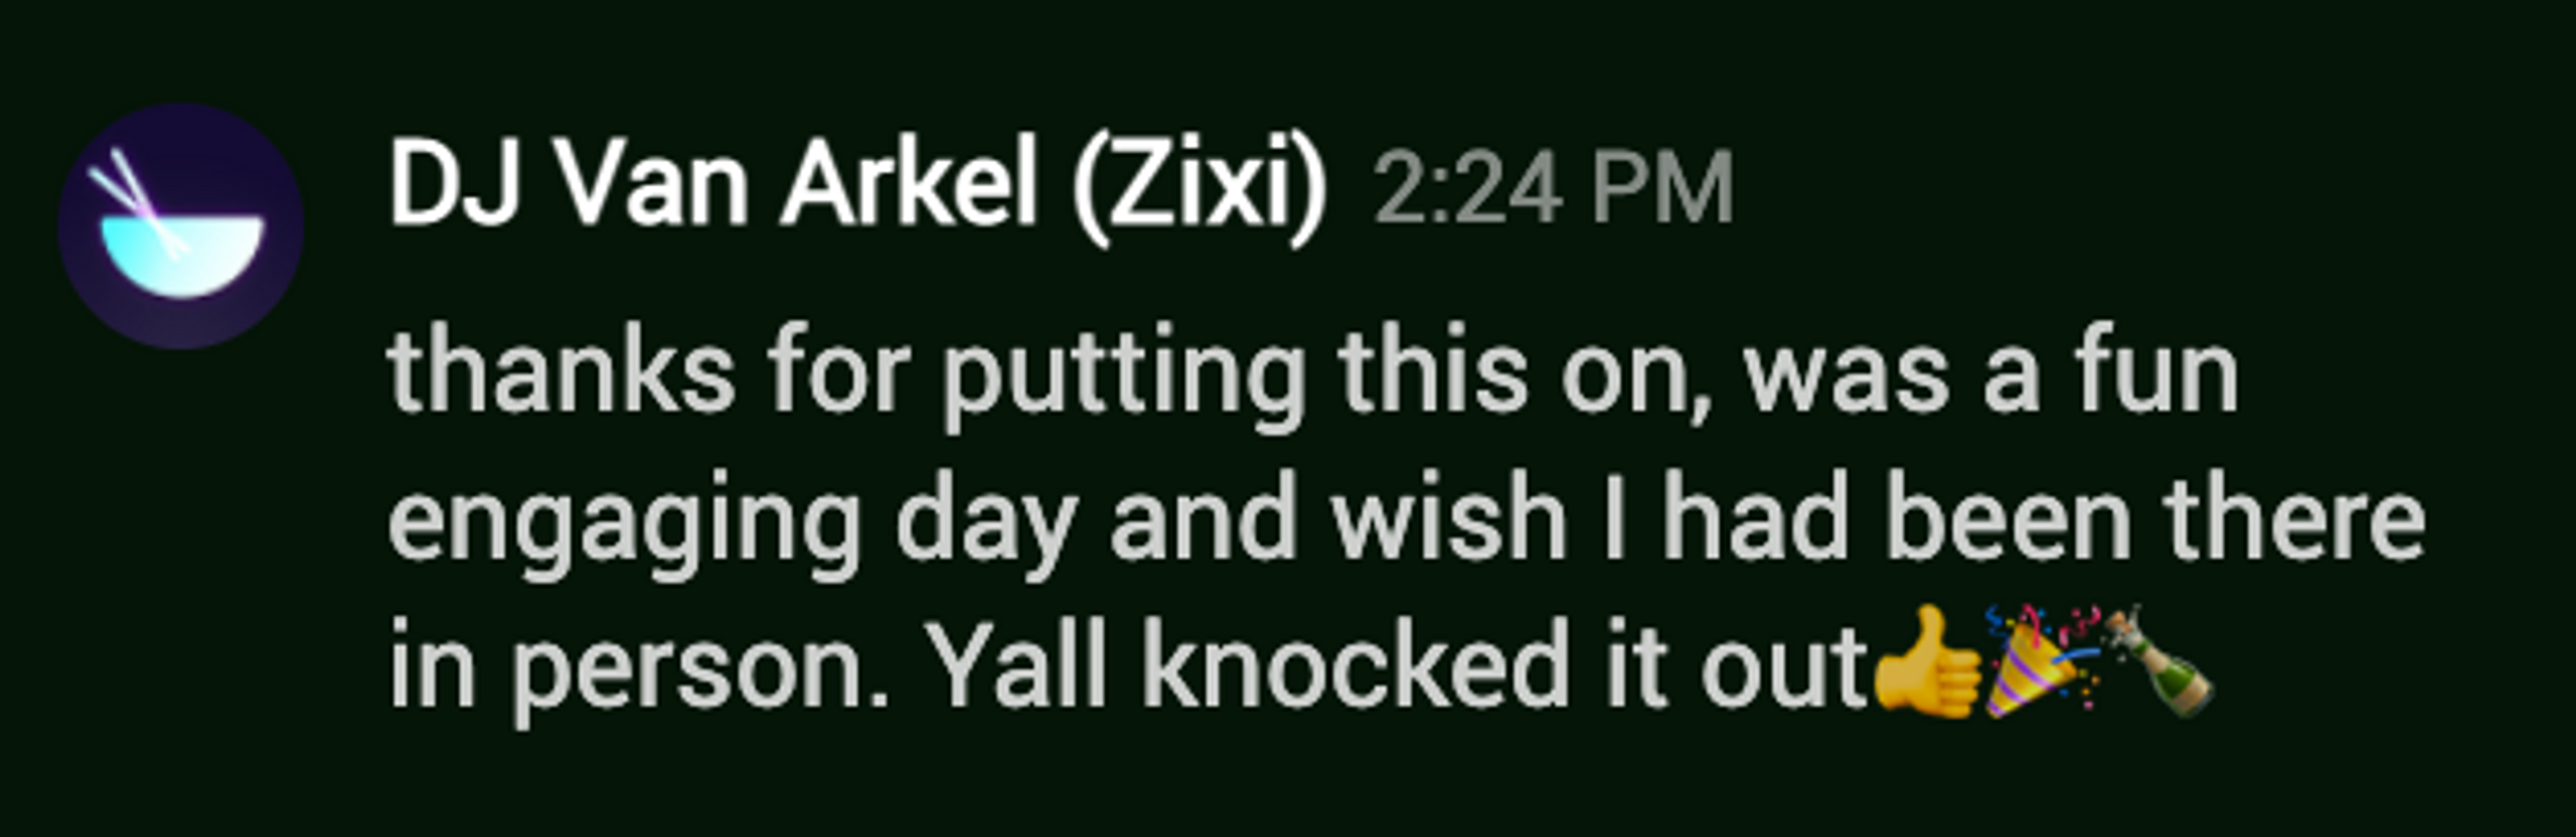 Screenshot of a chat room message by DJ Van Arkel (Zixi). It reads, "thanks for putting htis on, was a fun engaging day and wish I had been there in person. Yall knocked it out". Thumbs up emoji. Party popper emoji. Champagne bottle emoji.